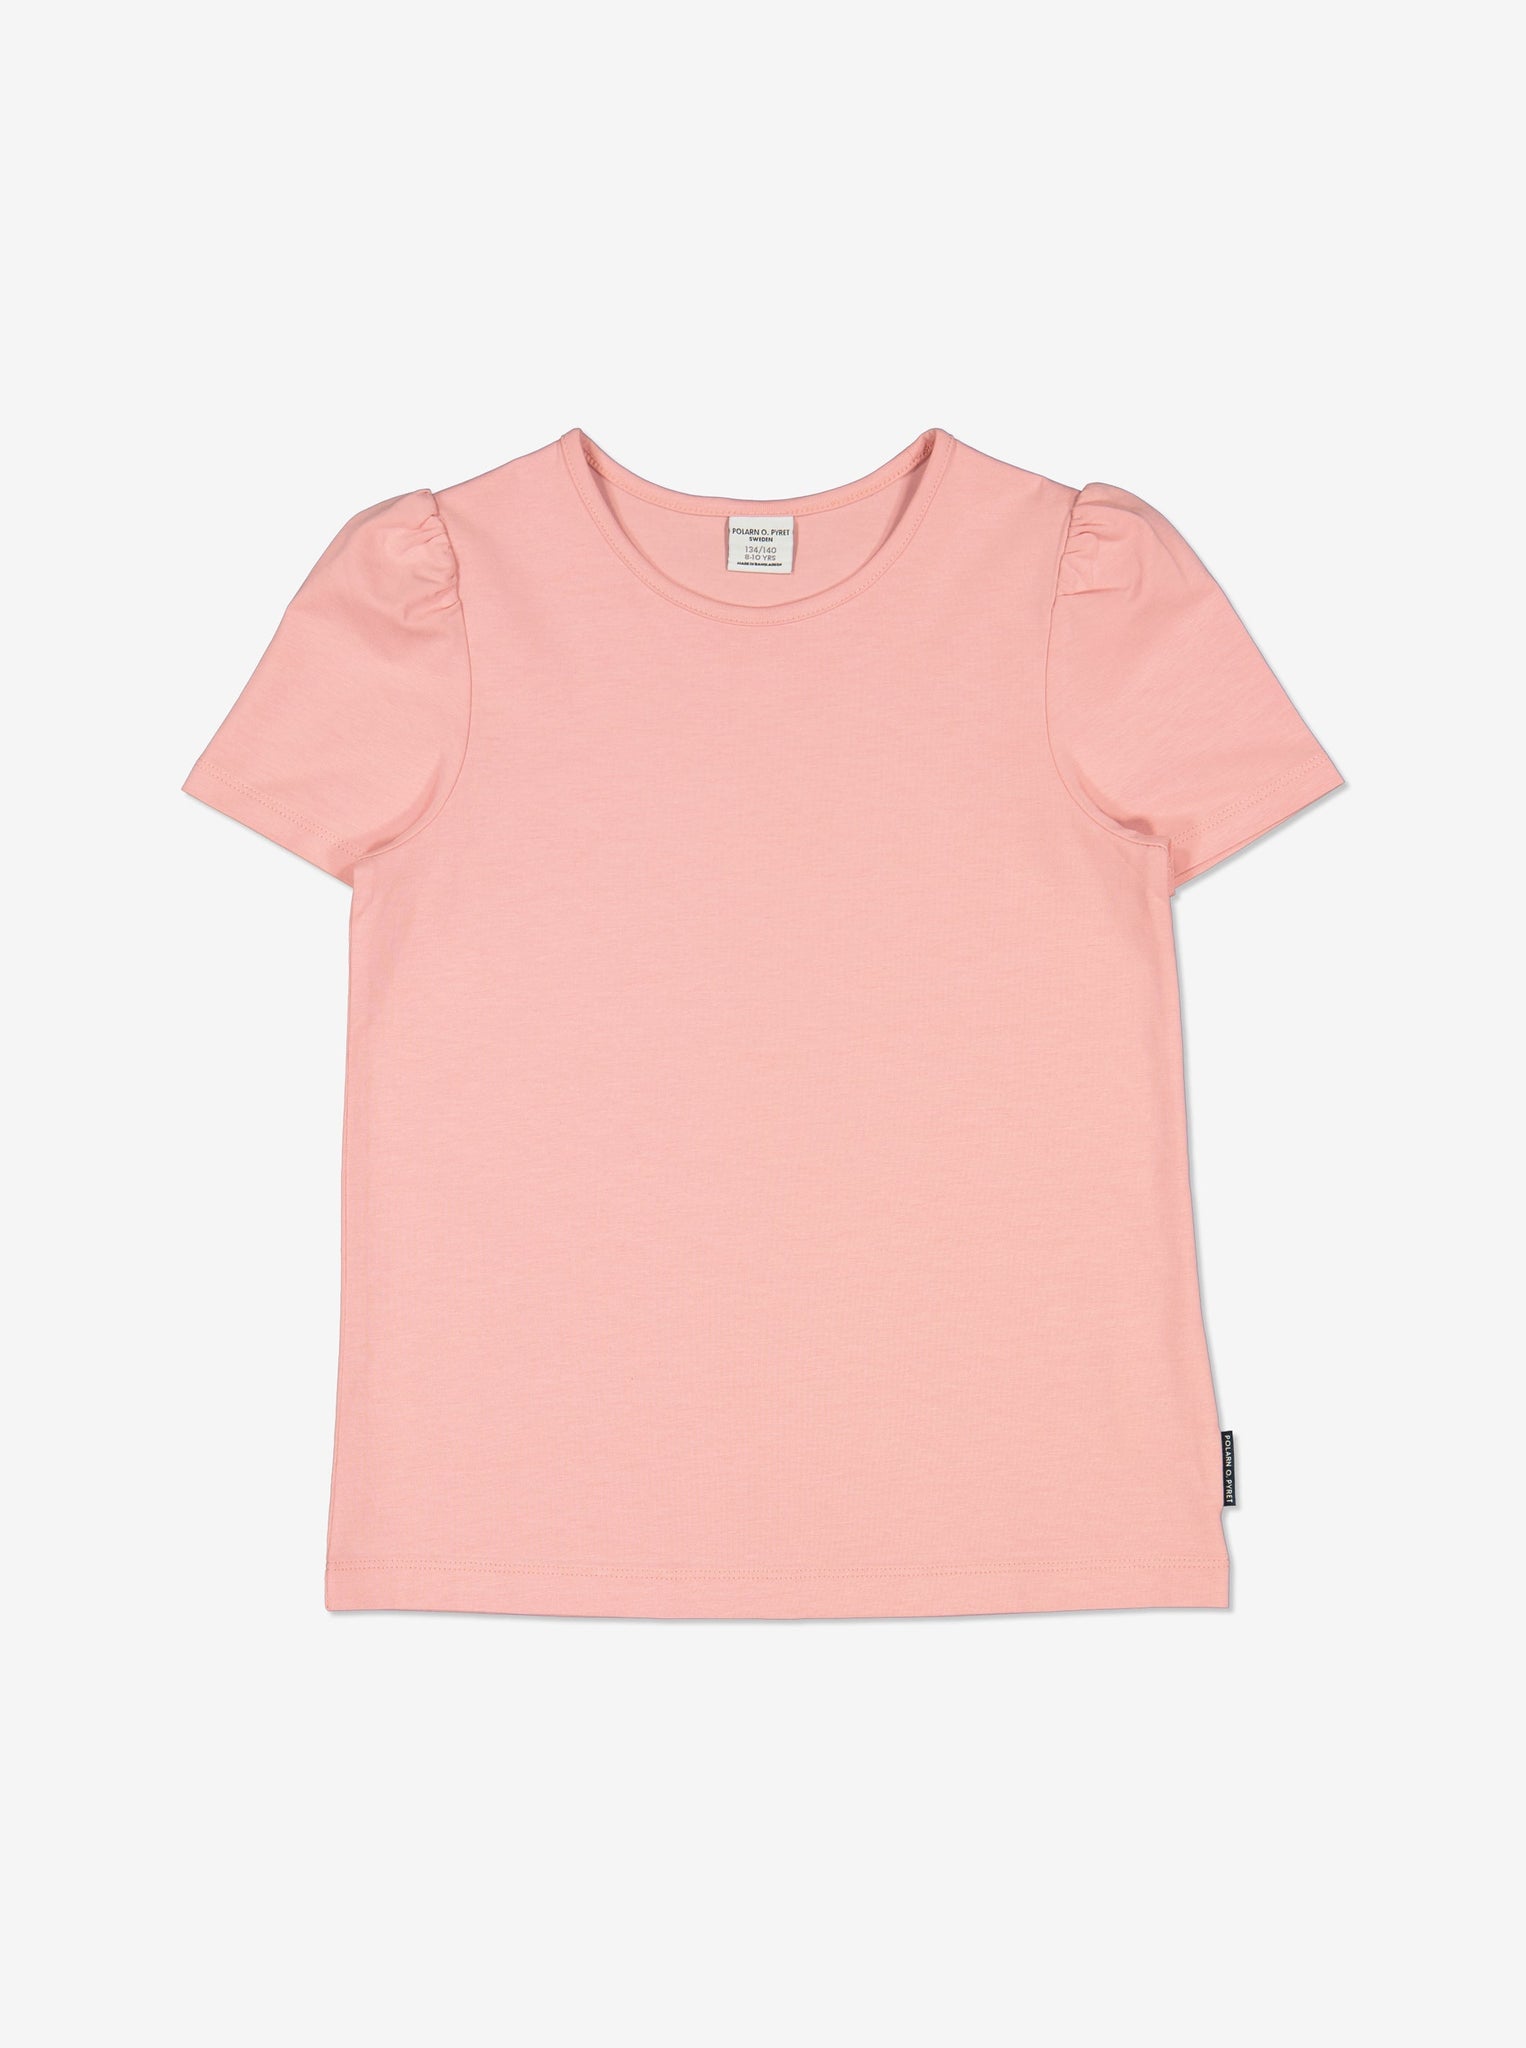  Puffed Sleeve Pink Girls Top from Polarn O. Pyret Kidswear. Made using eco-friendly materials.